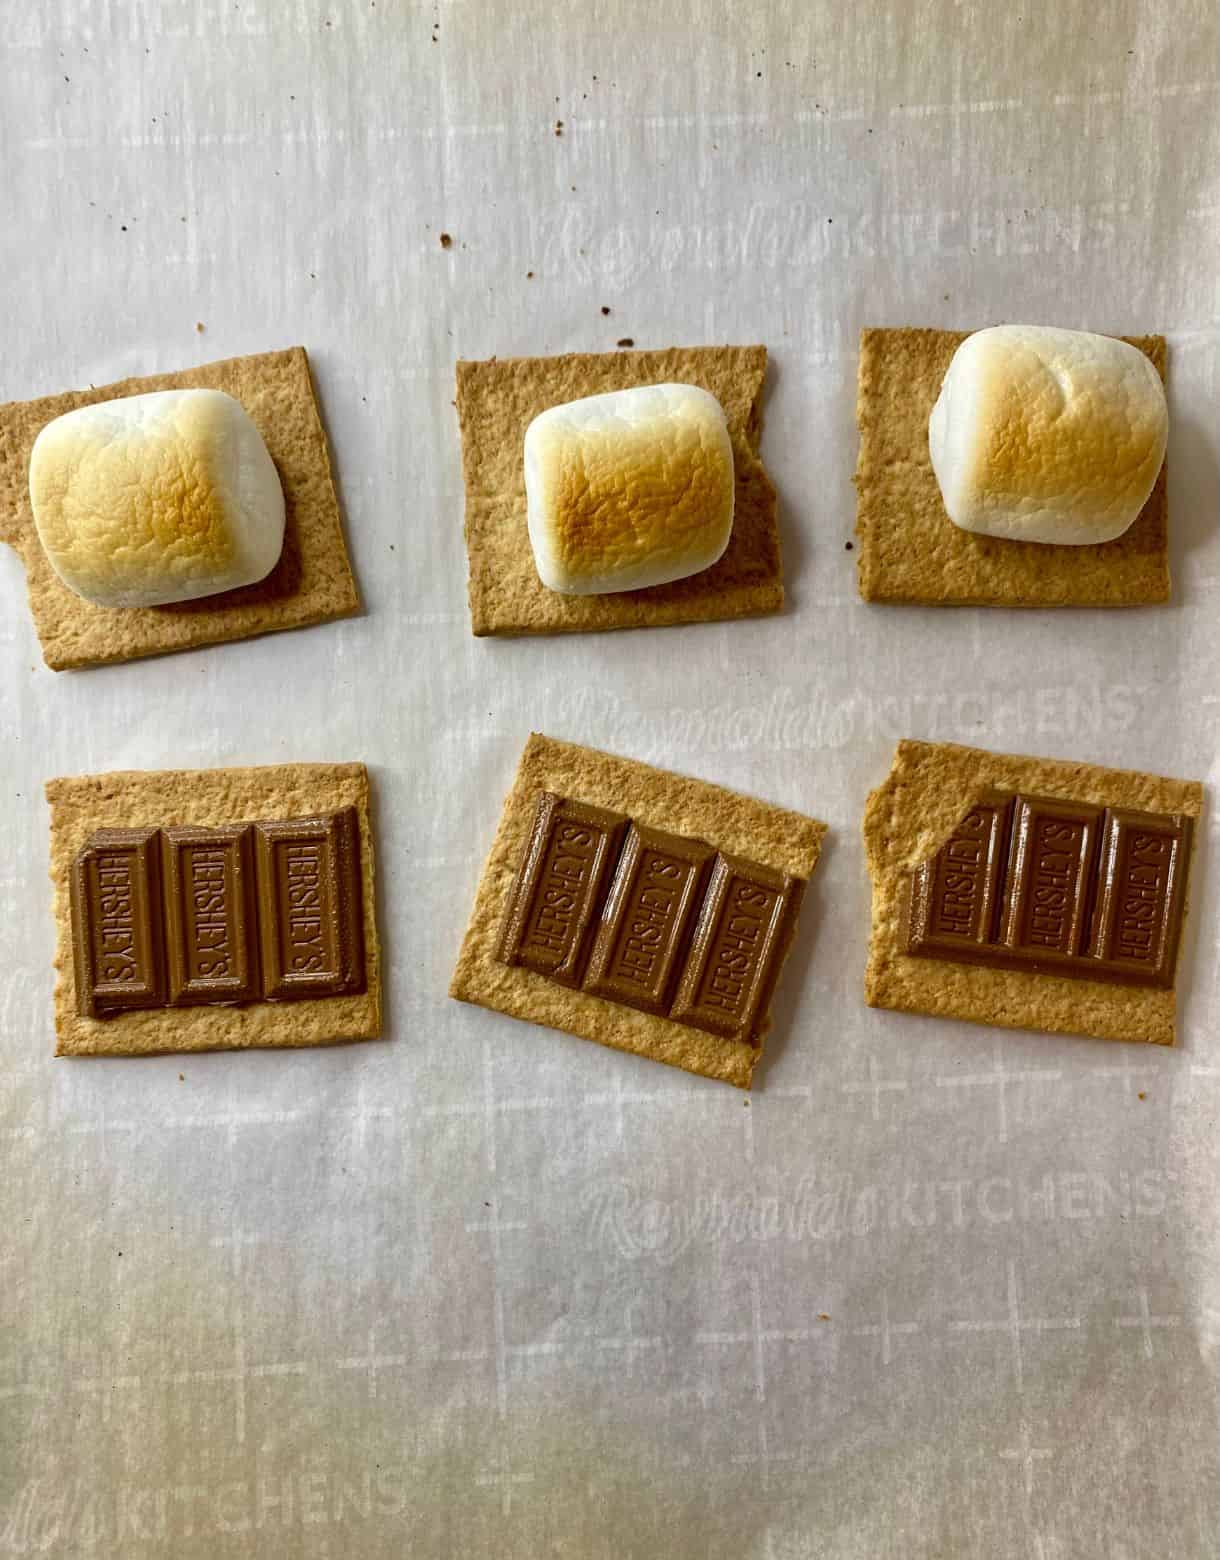 A pan of Oven S'mores after baking with golden marshmallows.